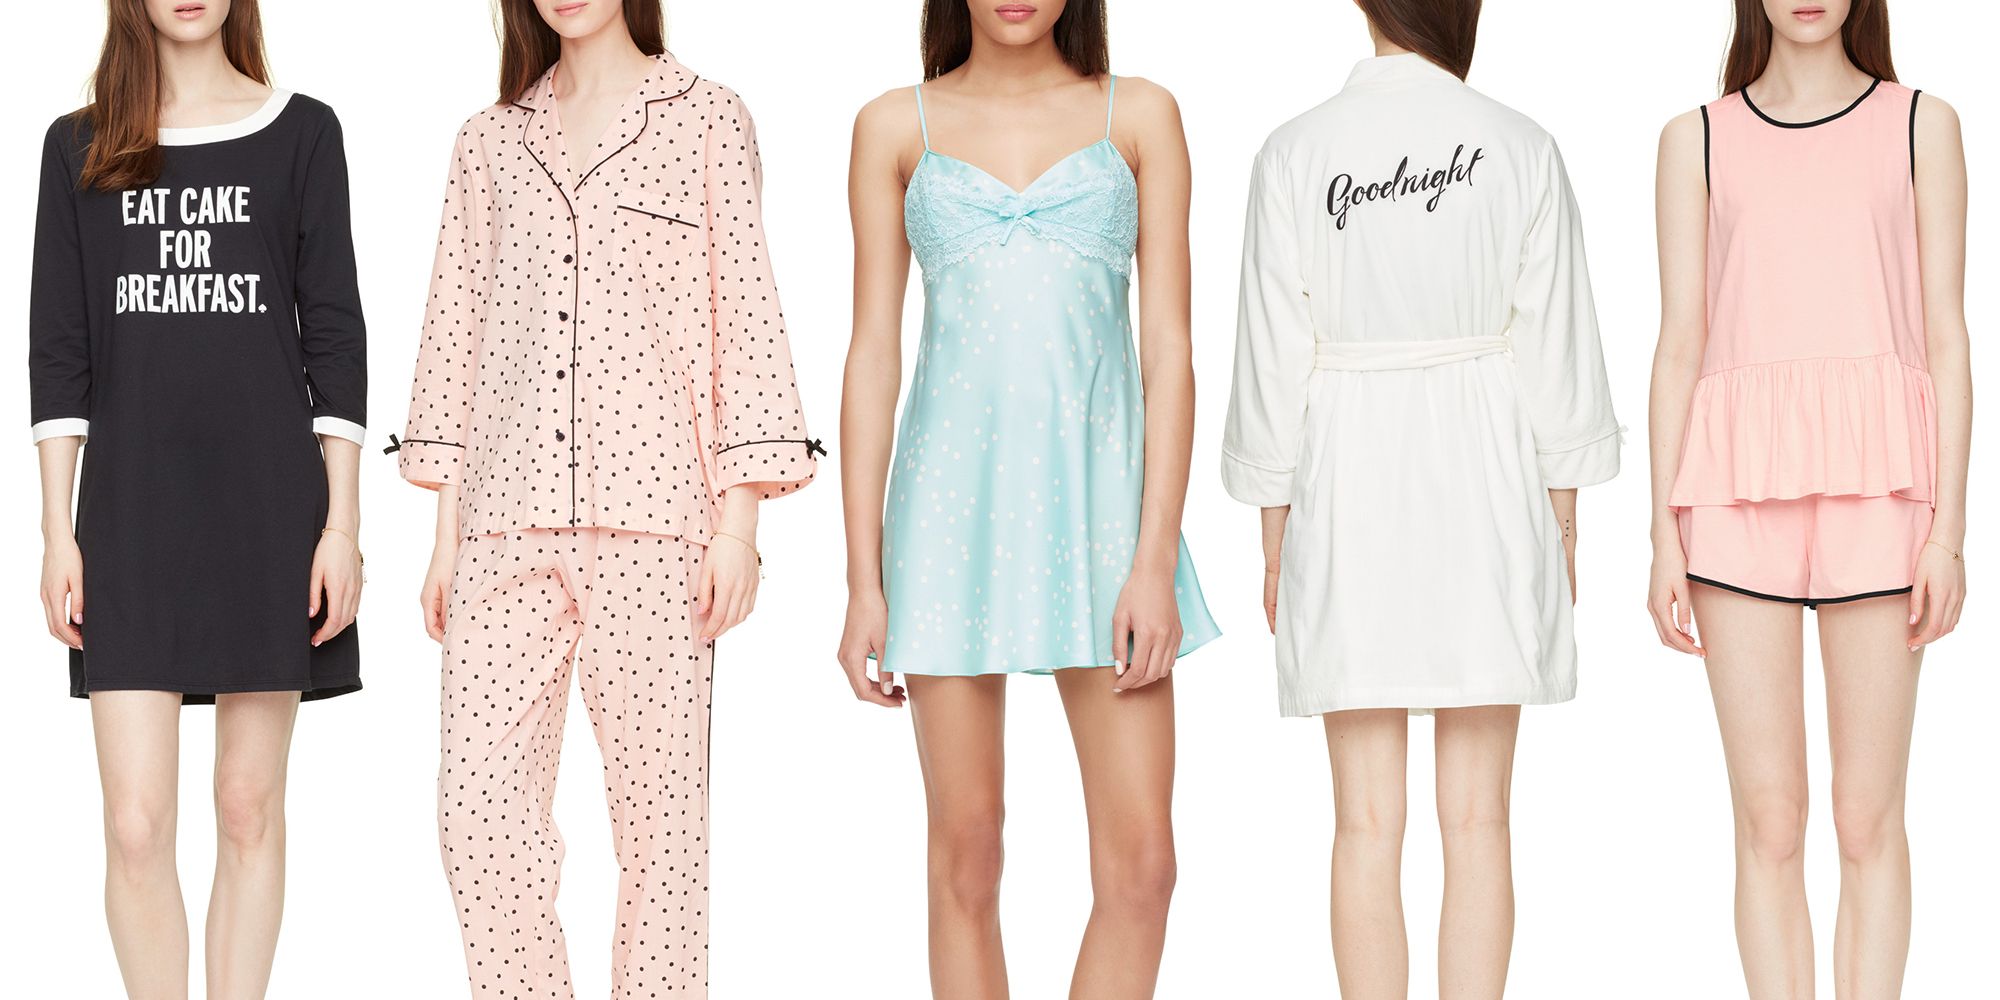 10 Best Pajamas from Kate Spade's Adorable New Pajamas Collection